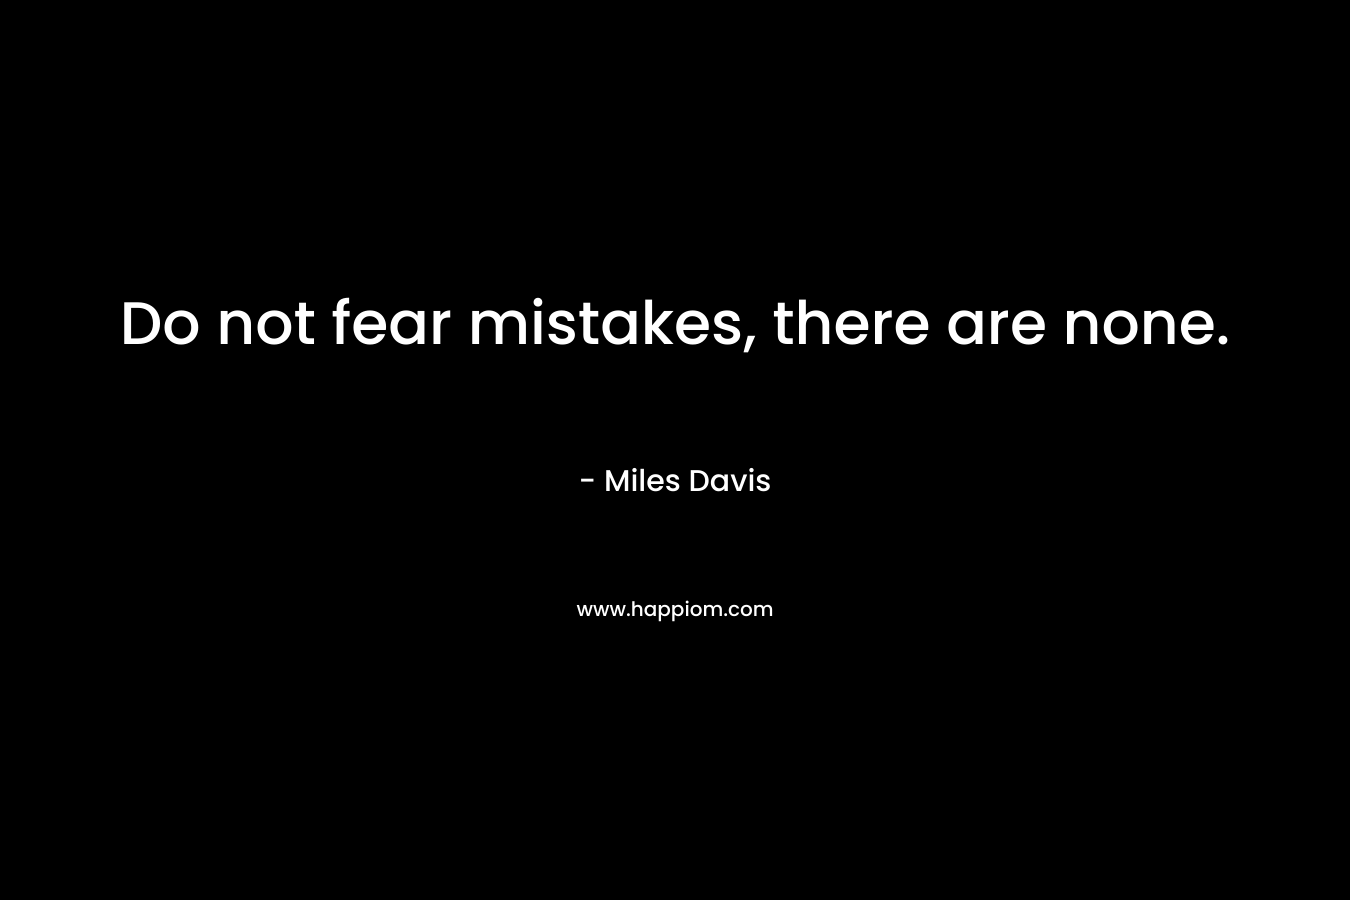 Do not fear mistakes, there are none.